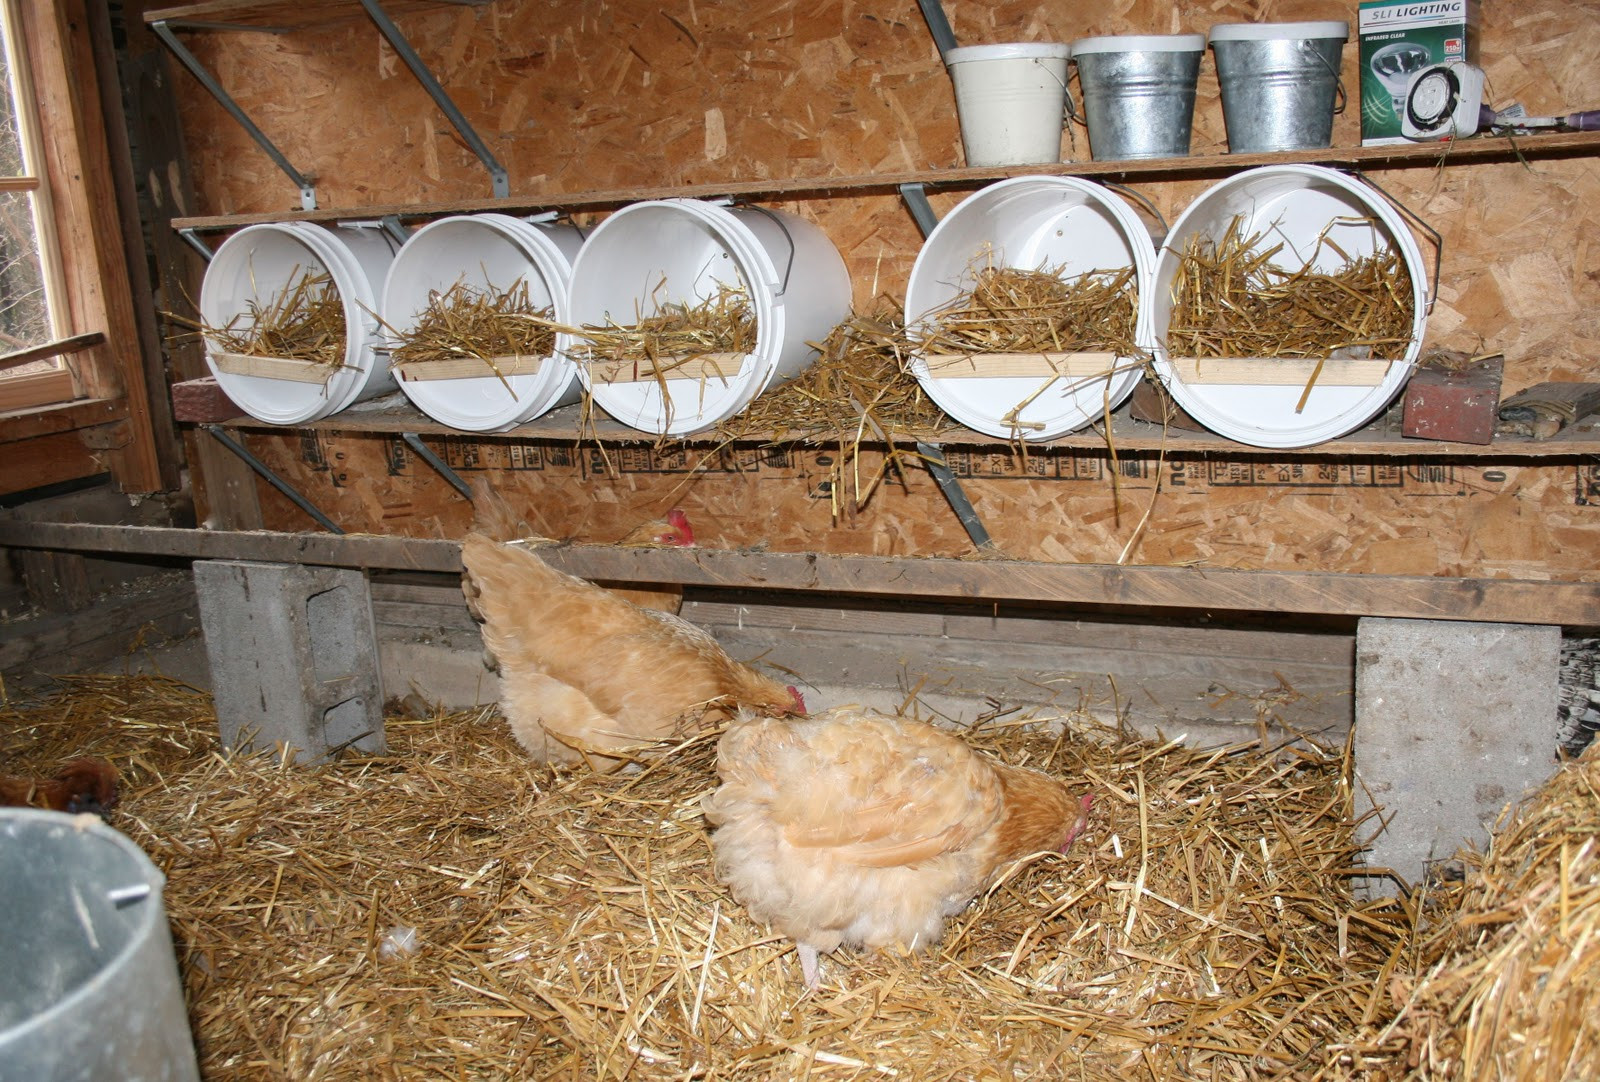 DIY Nesting Boxes For Chickens
 5 gallon buckets for nests Page 3